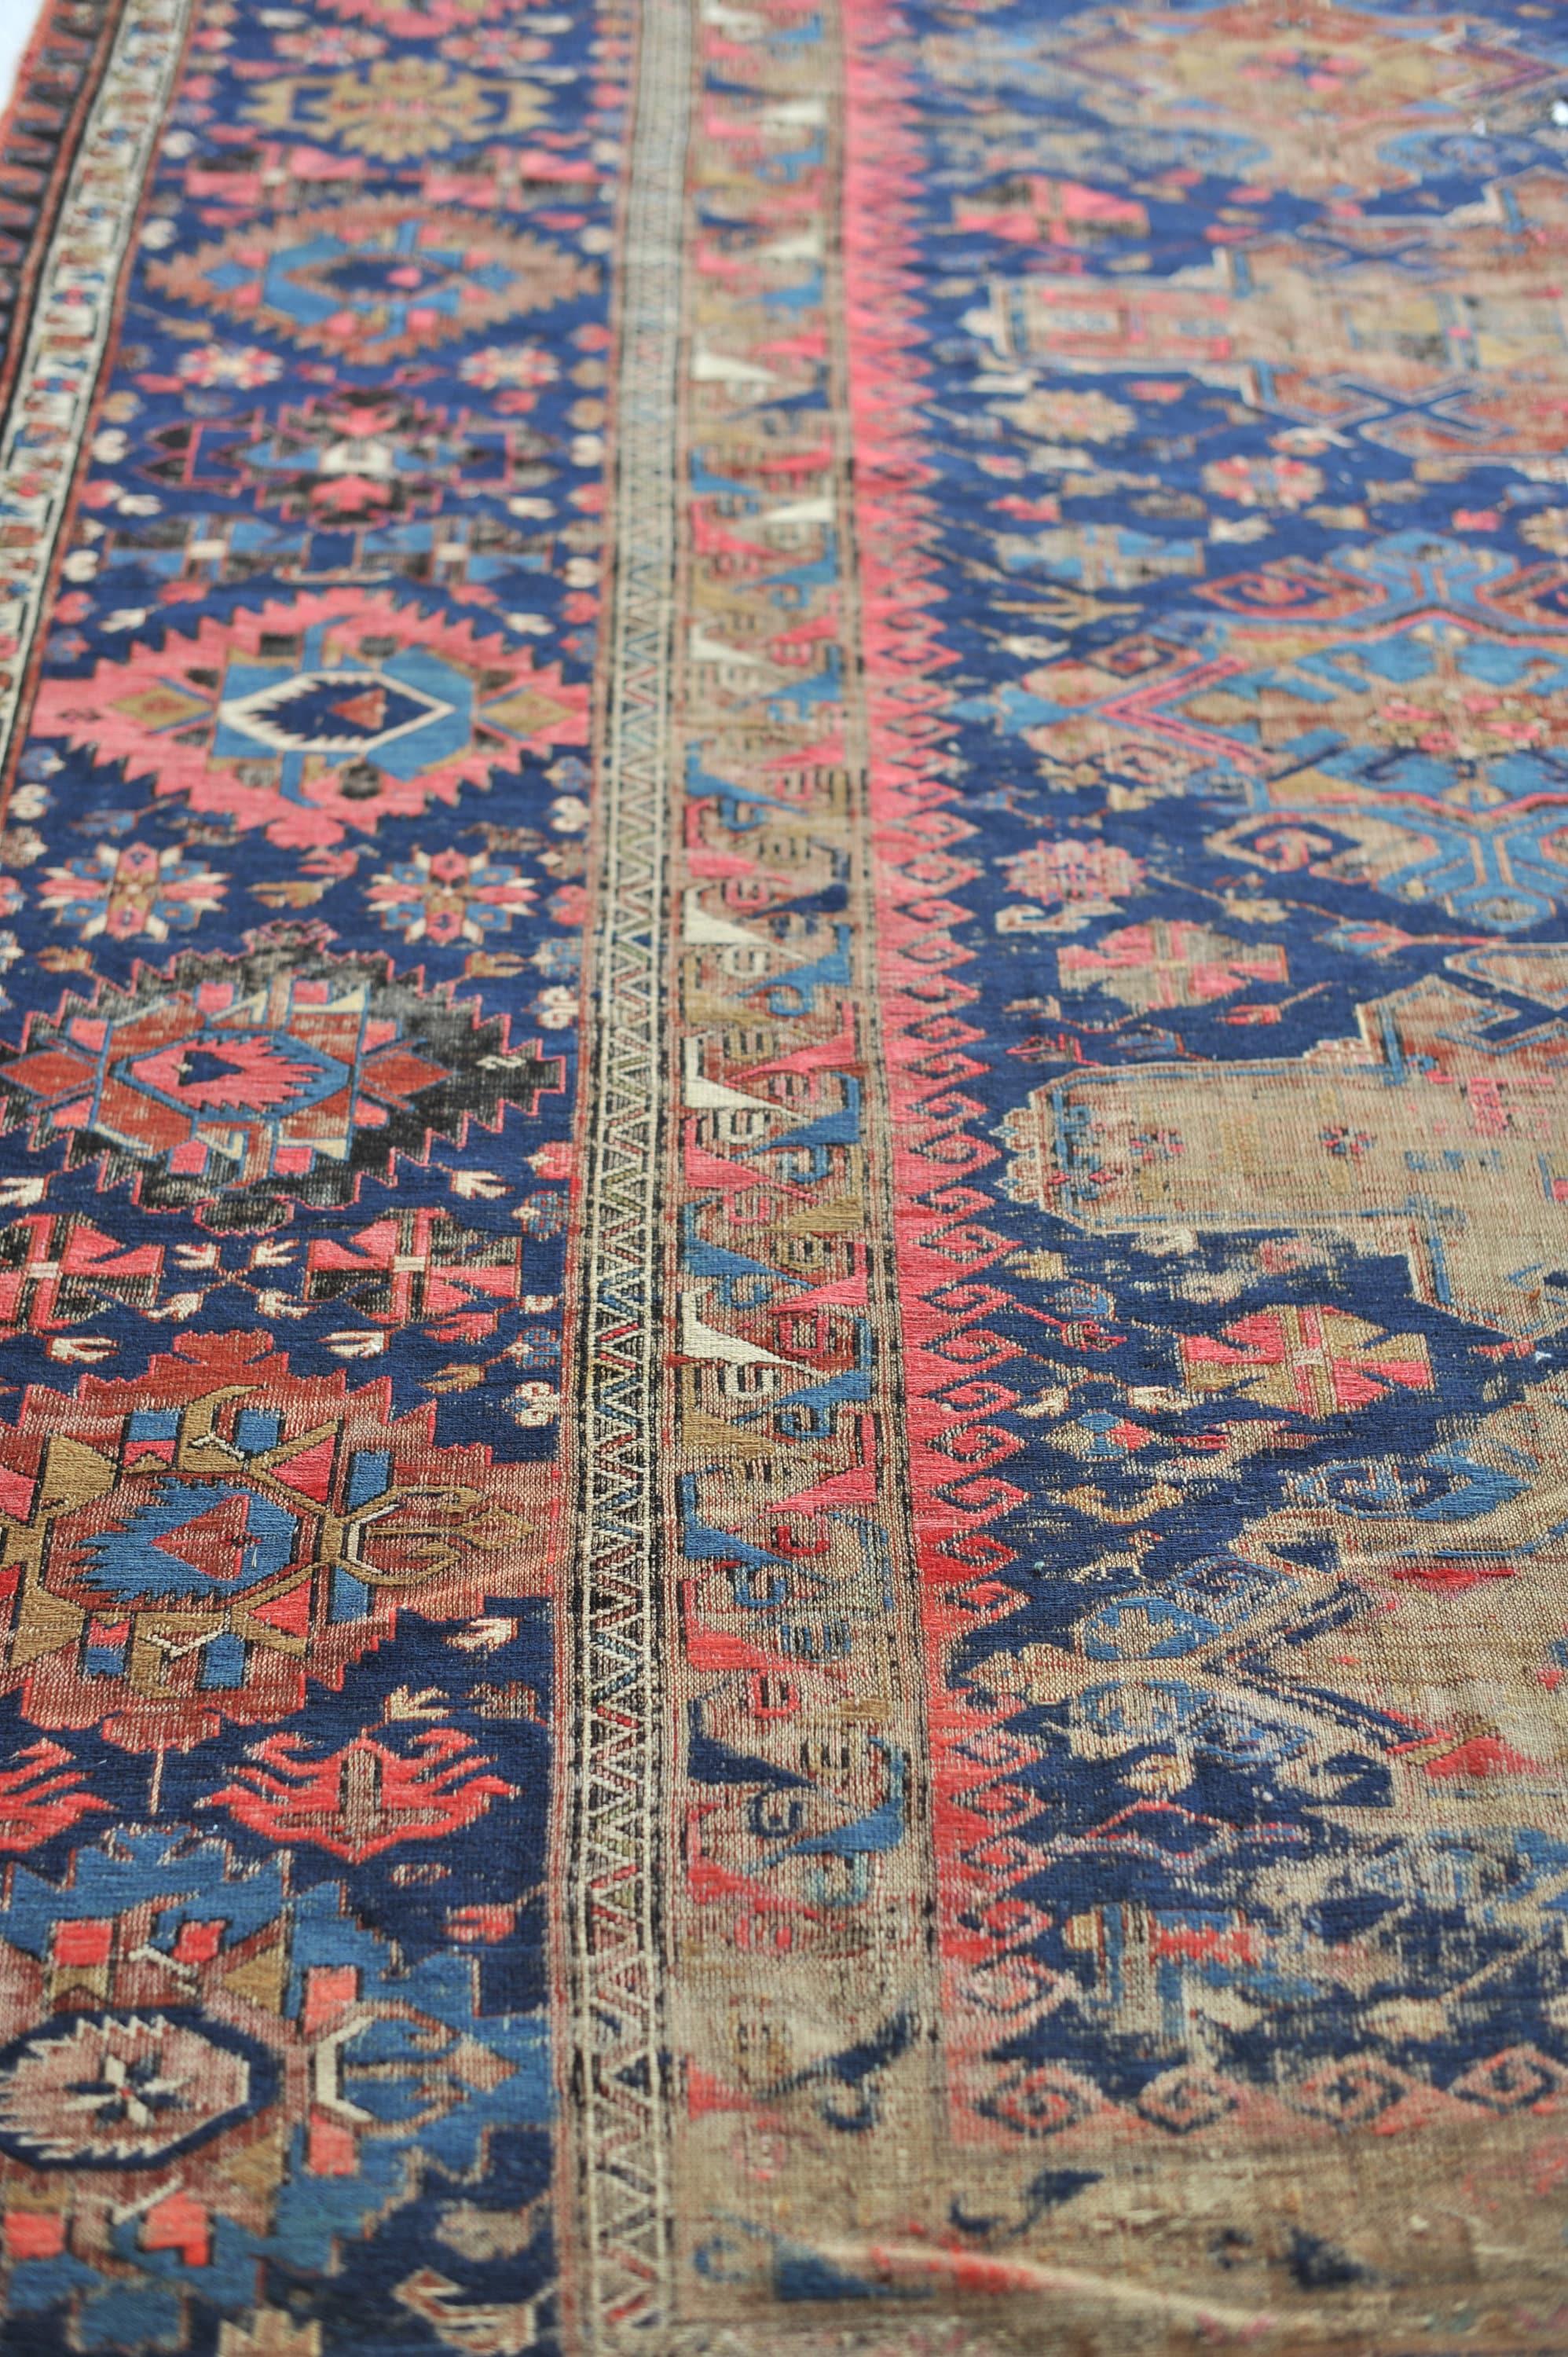 One-of-one Over-sized Palatial Antique Sumac Textile Rug, c.1910 For Sale 4